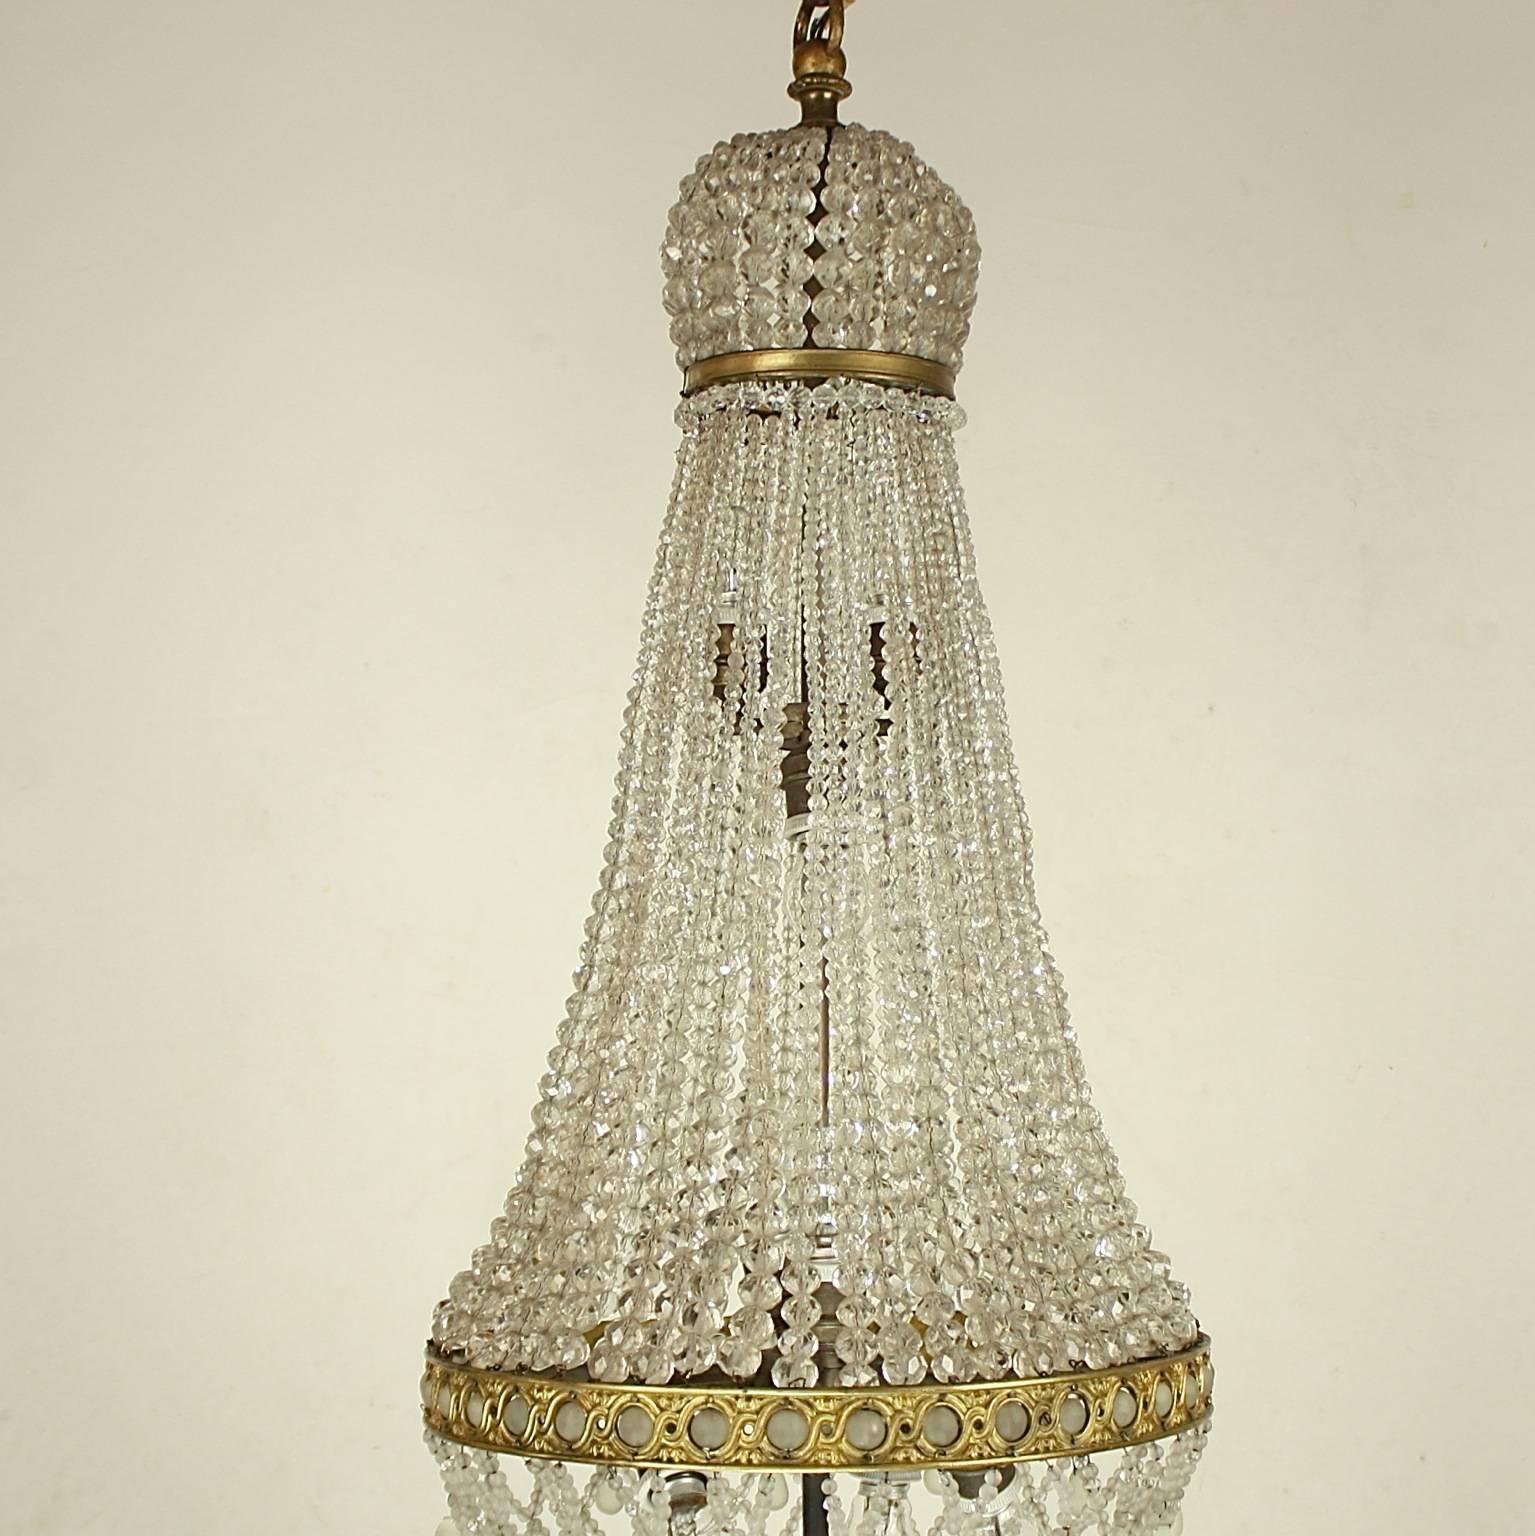 A fine gilt-bronze cut-crystal tent and bag chandelier with a corona in the form of a crown made of small facetted pearls above a fine bronze band, from which is suspended chains of graduated cut-crystal pearls to an elaborate gilt-bronze gallery,